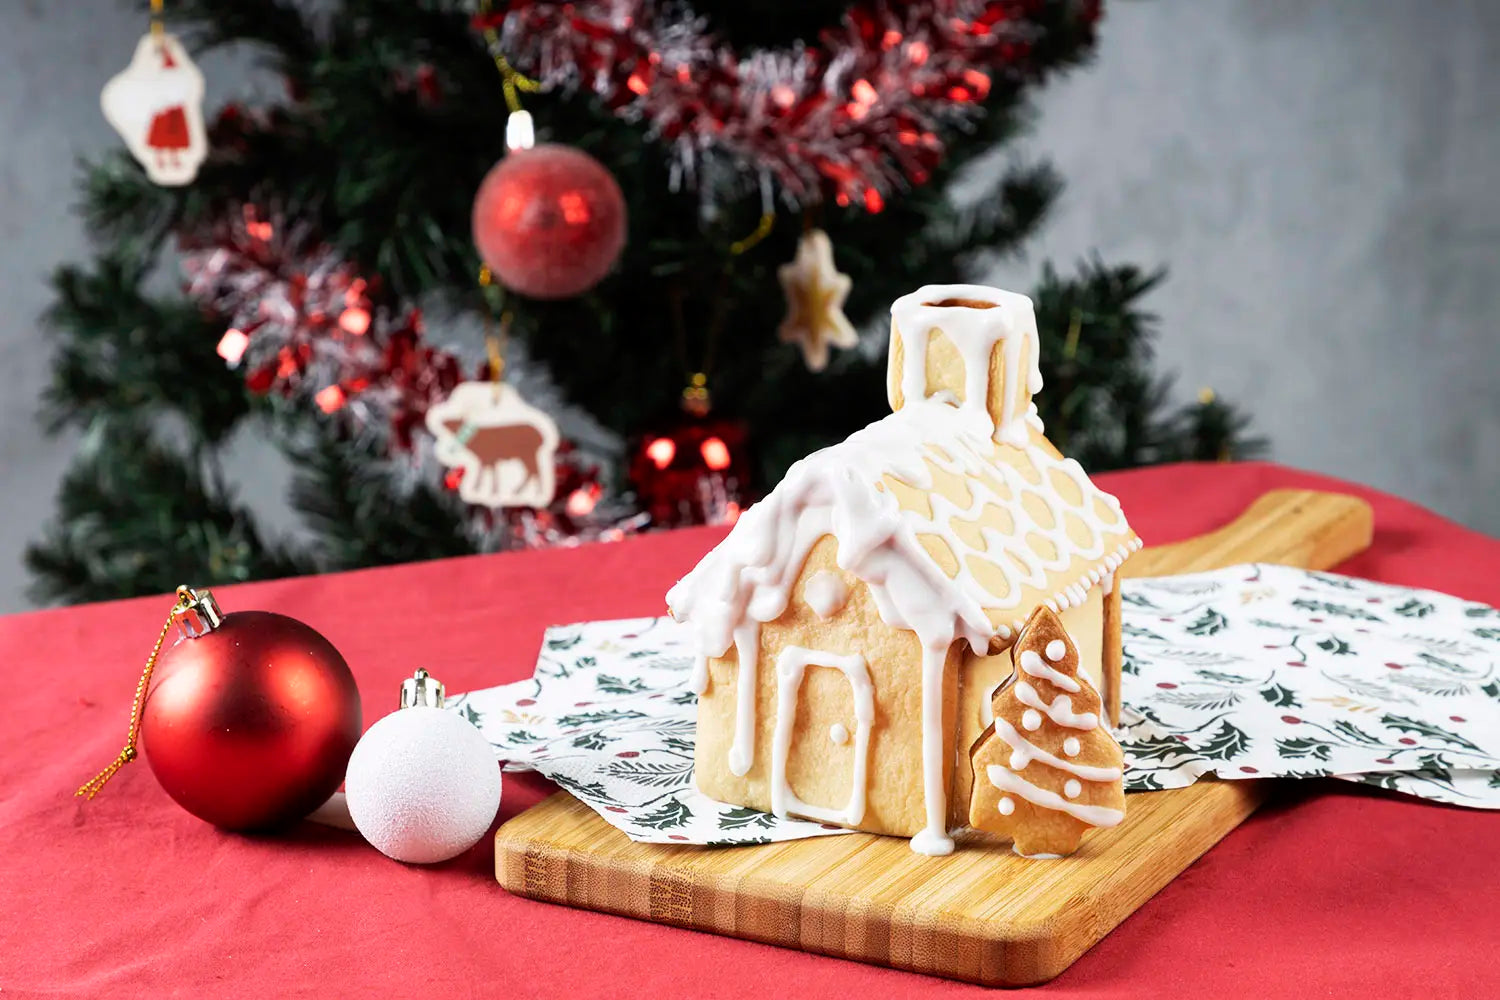 https://cdn.shopify.com/s/files/1/1610/3863/files/TIGERCROWN_Cake_Land_Stainless_Steel_Cookie_Cutter_3D_House_7pcs_HG8A6672.webp?v=1701068126